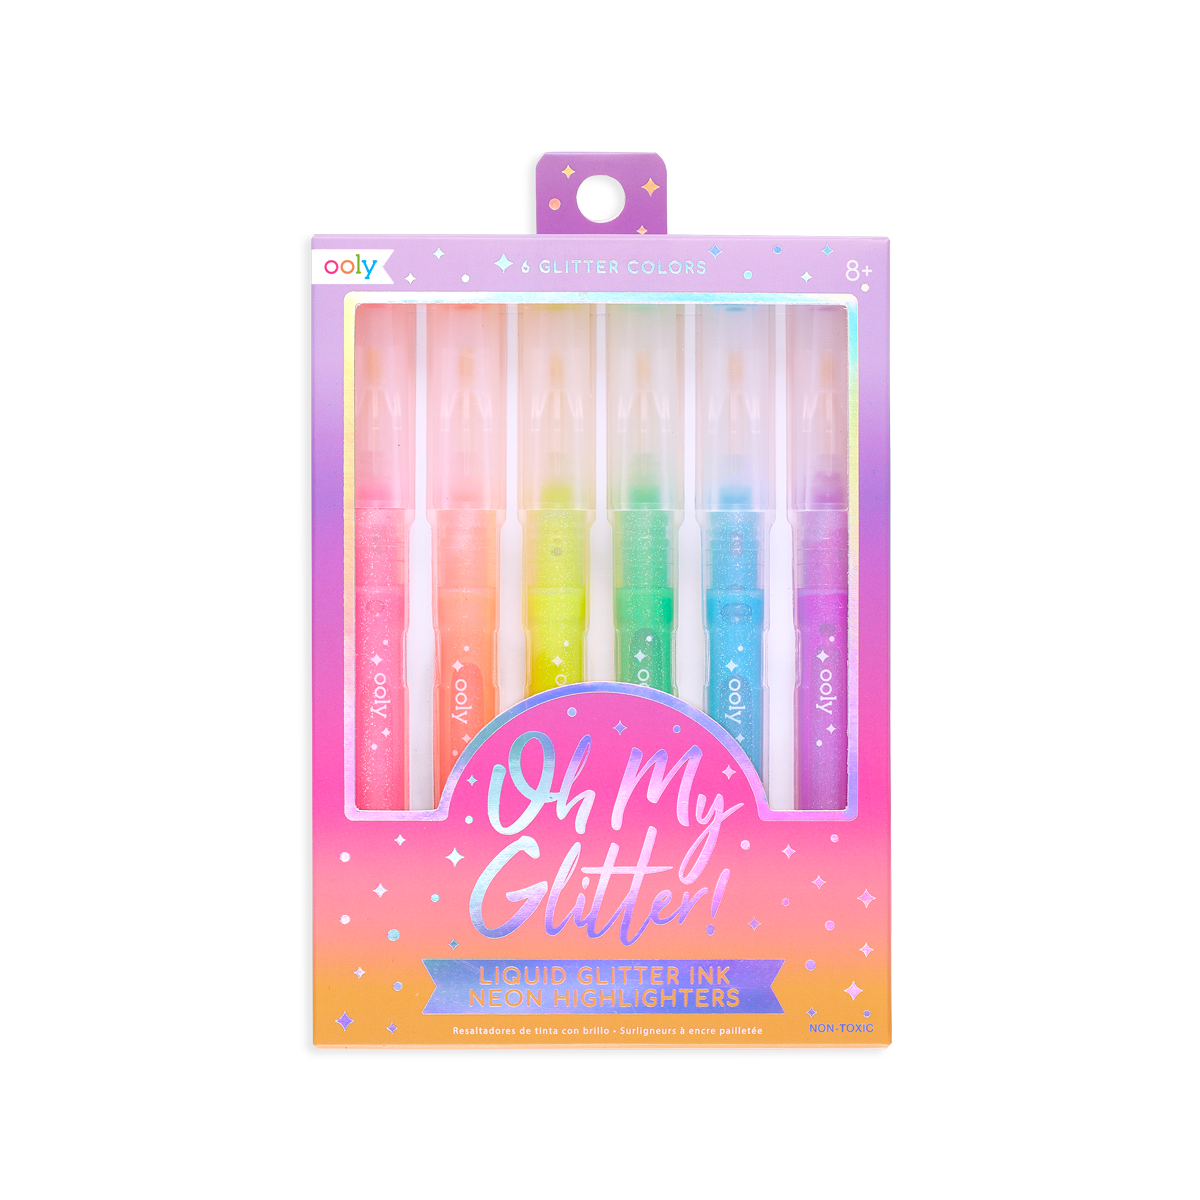 ooly Rainbow Sparkle Glitter Markers